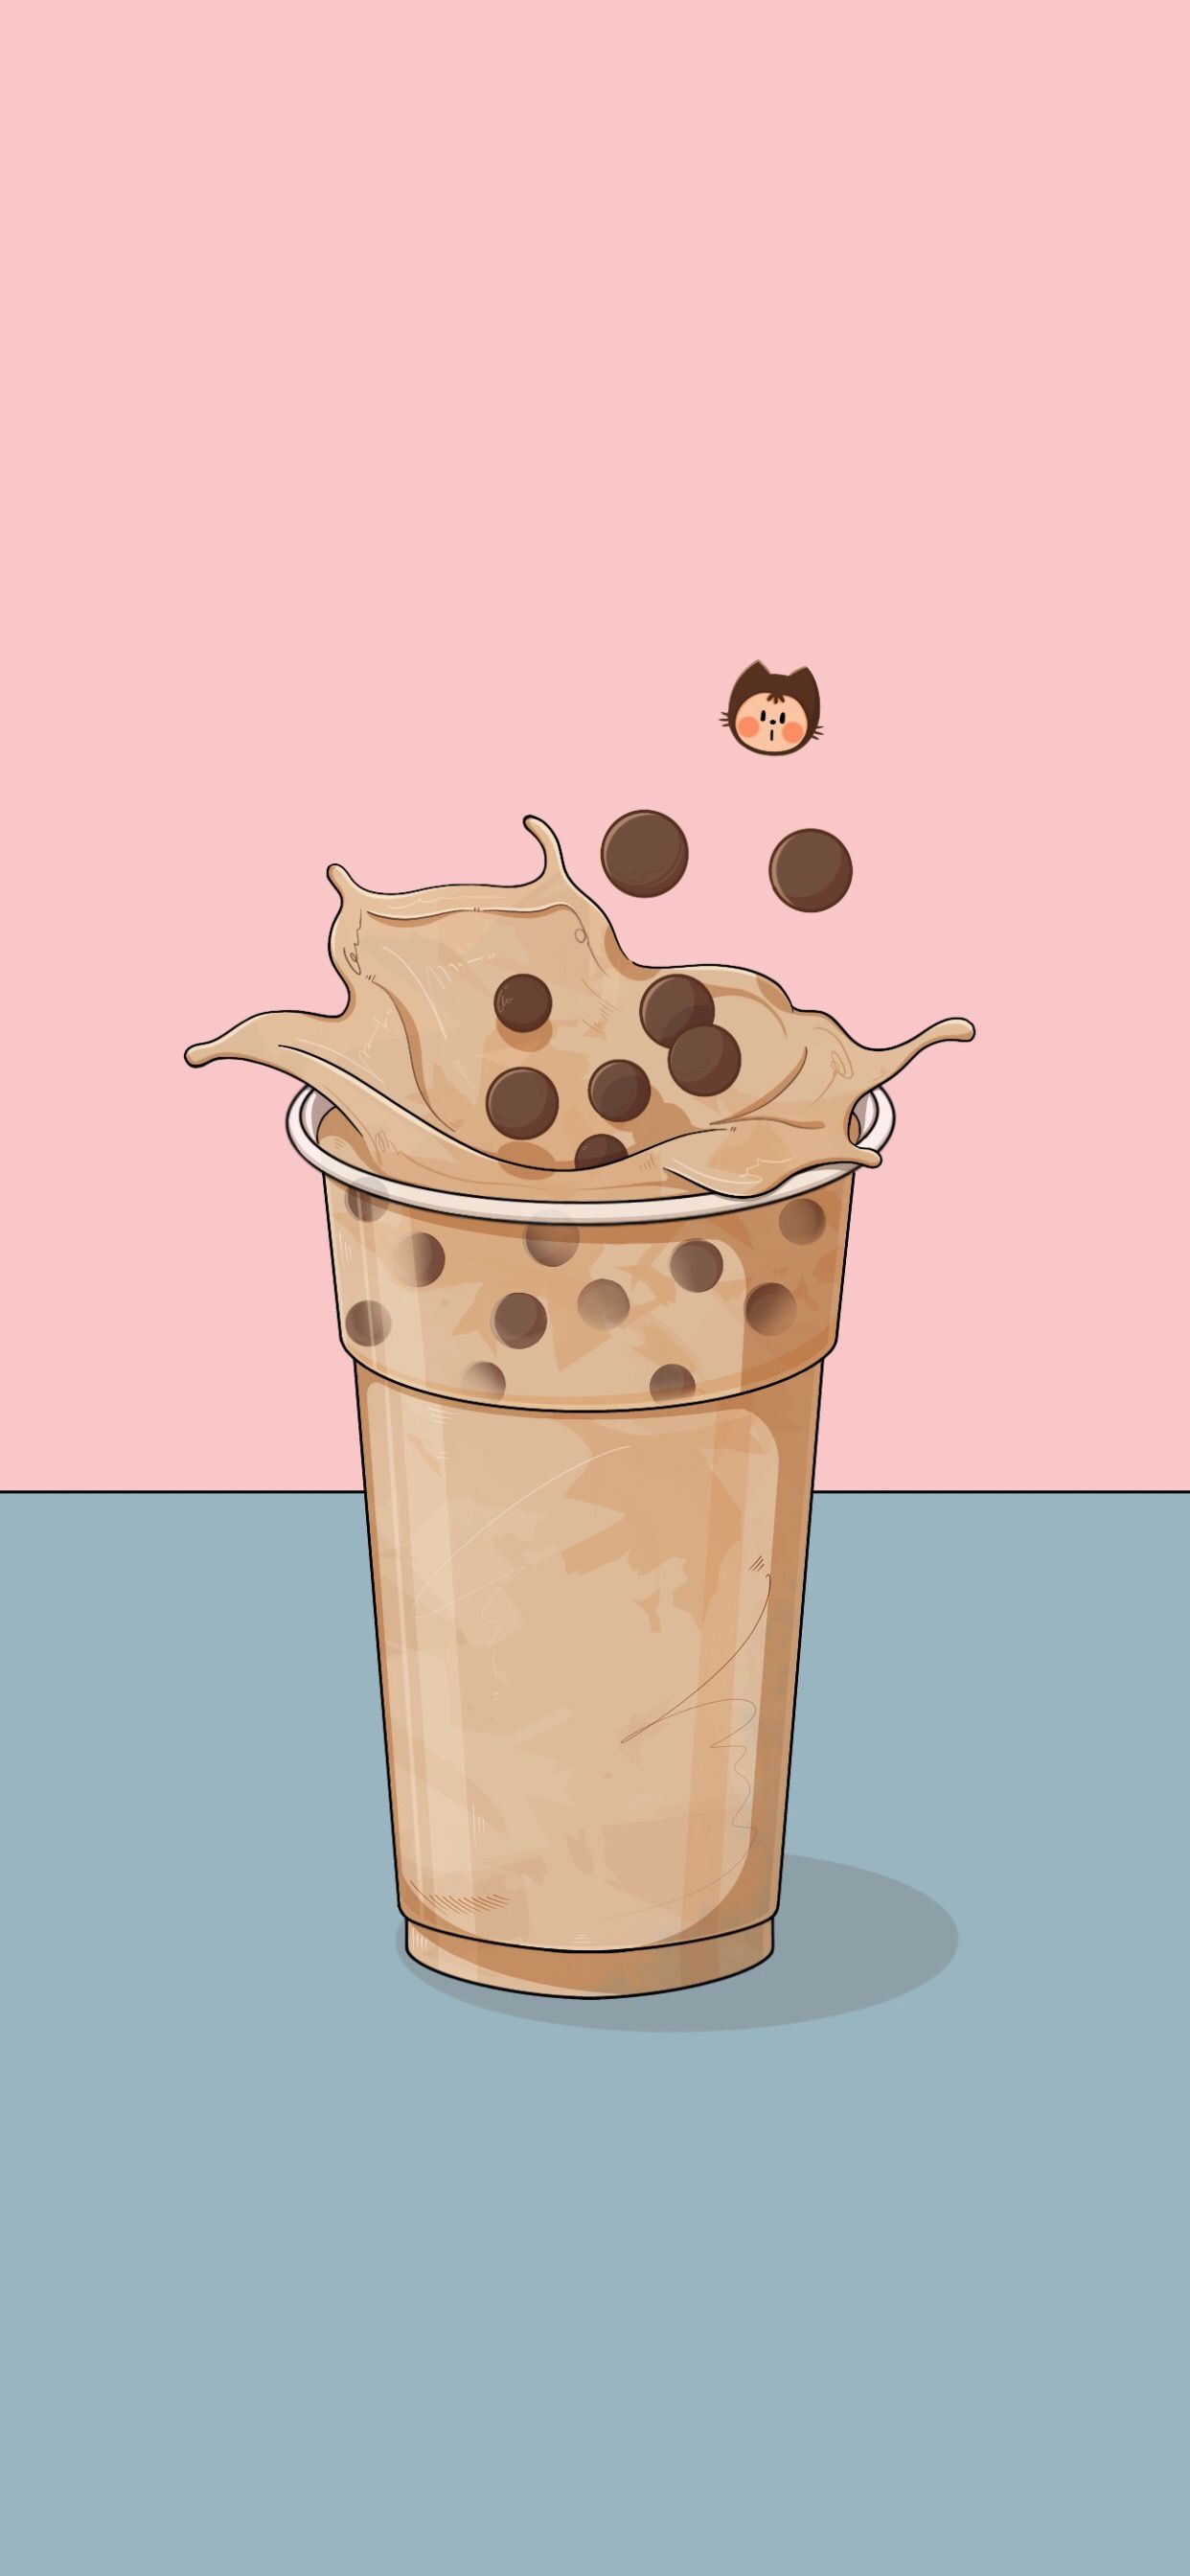 A cup of coffee with chocolate sprinkled on top - Boba